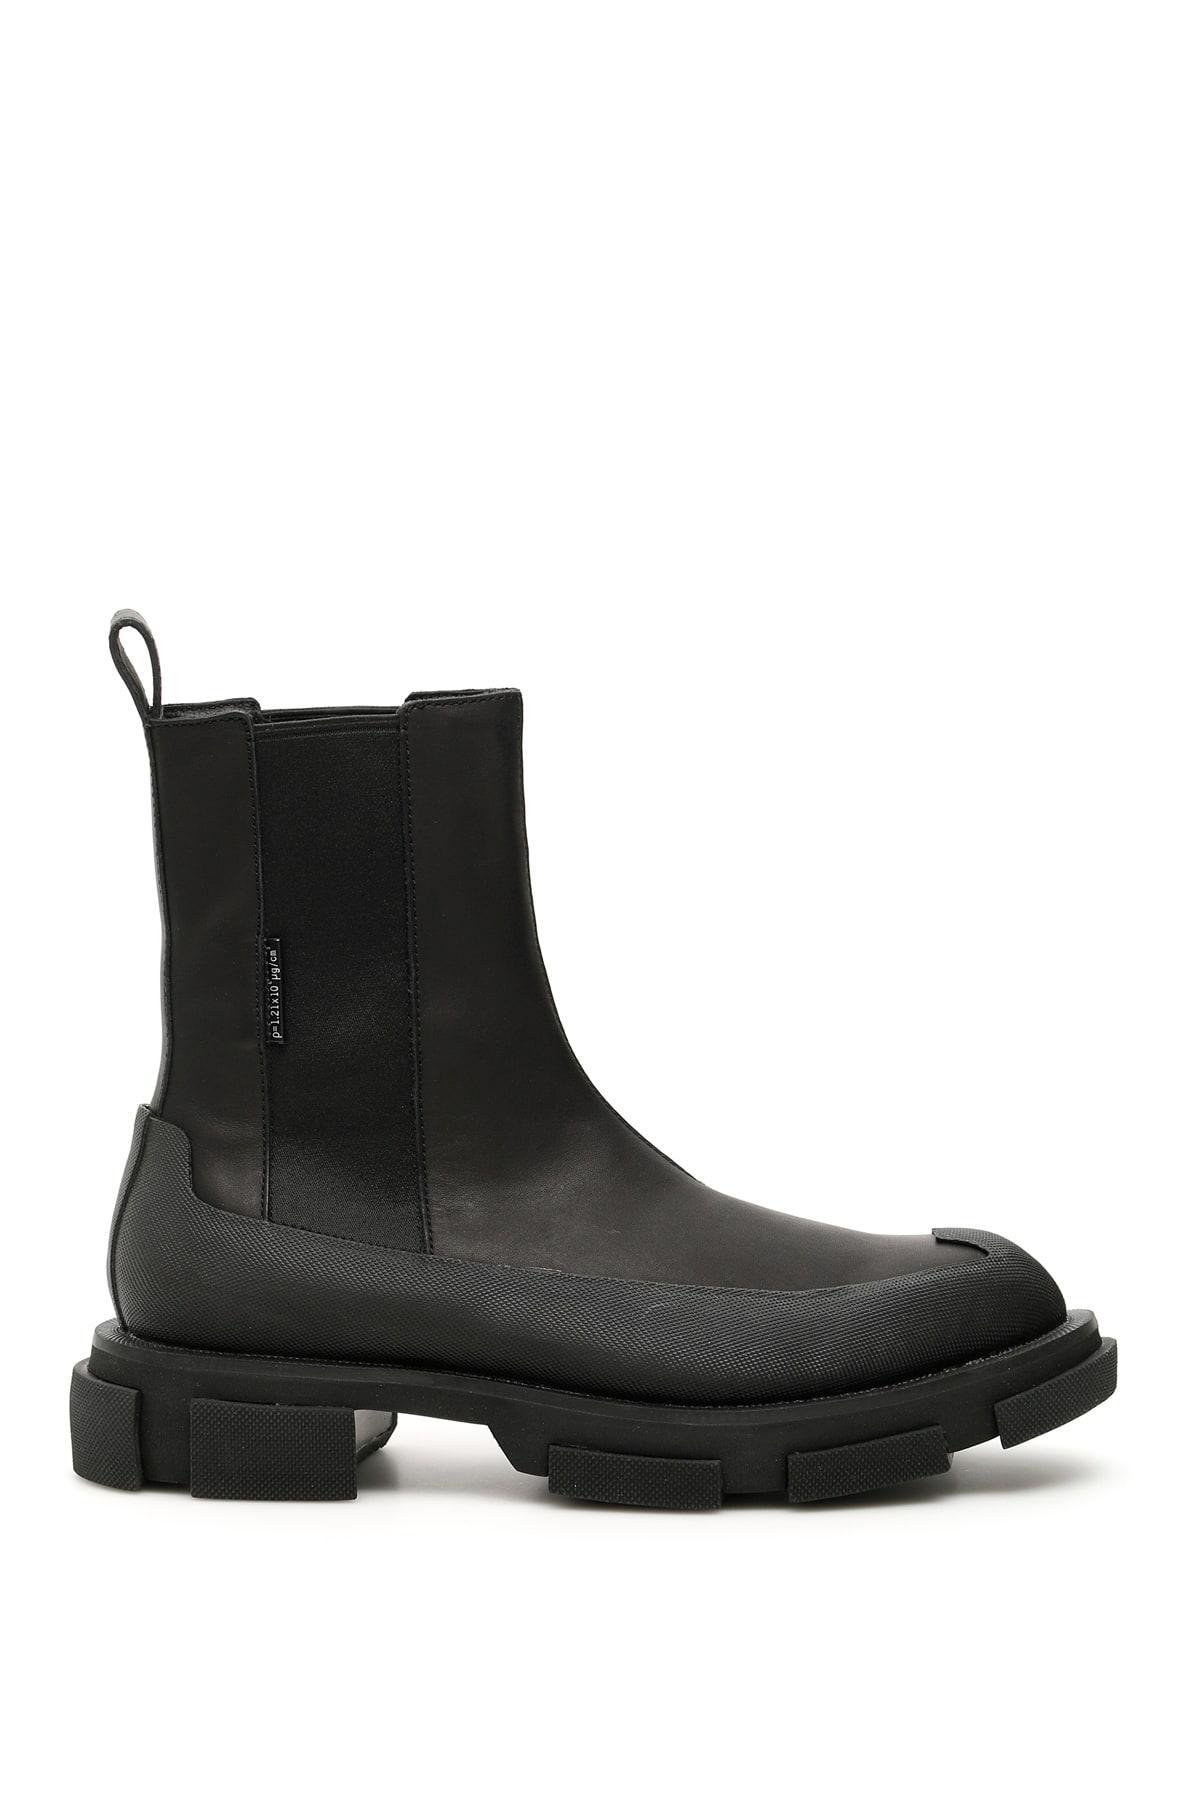 BOTH Paris Gao Chelsea Boots in Black for Men | Lyst